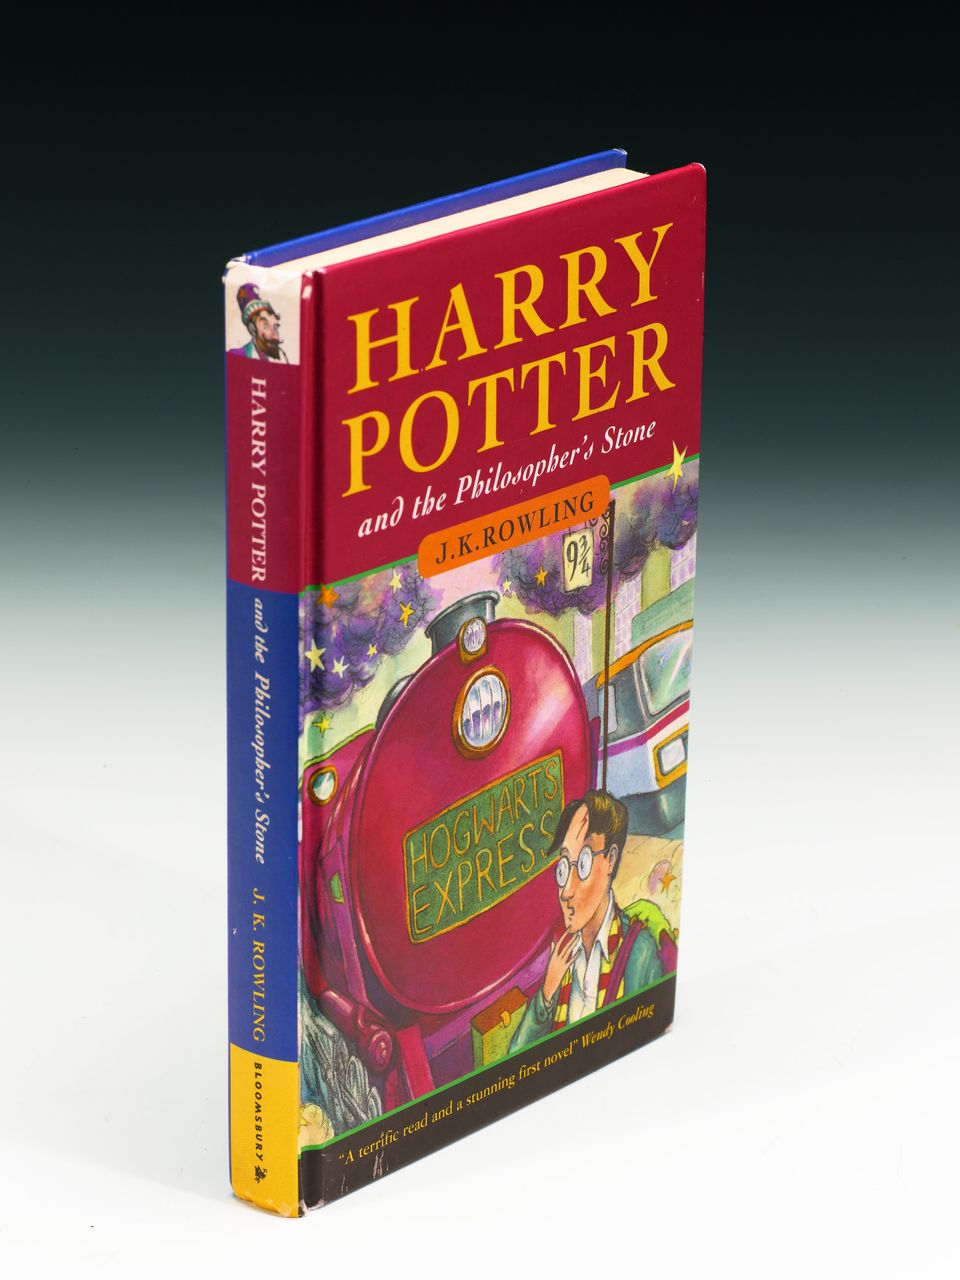 Harry Potter and the Philosopher's Stone by JK Rowling